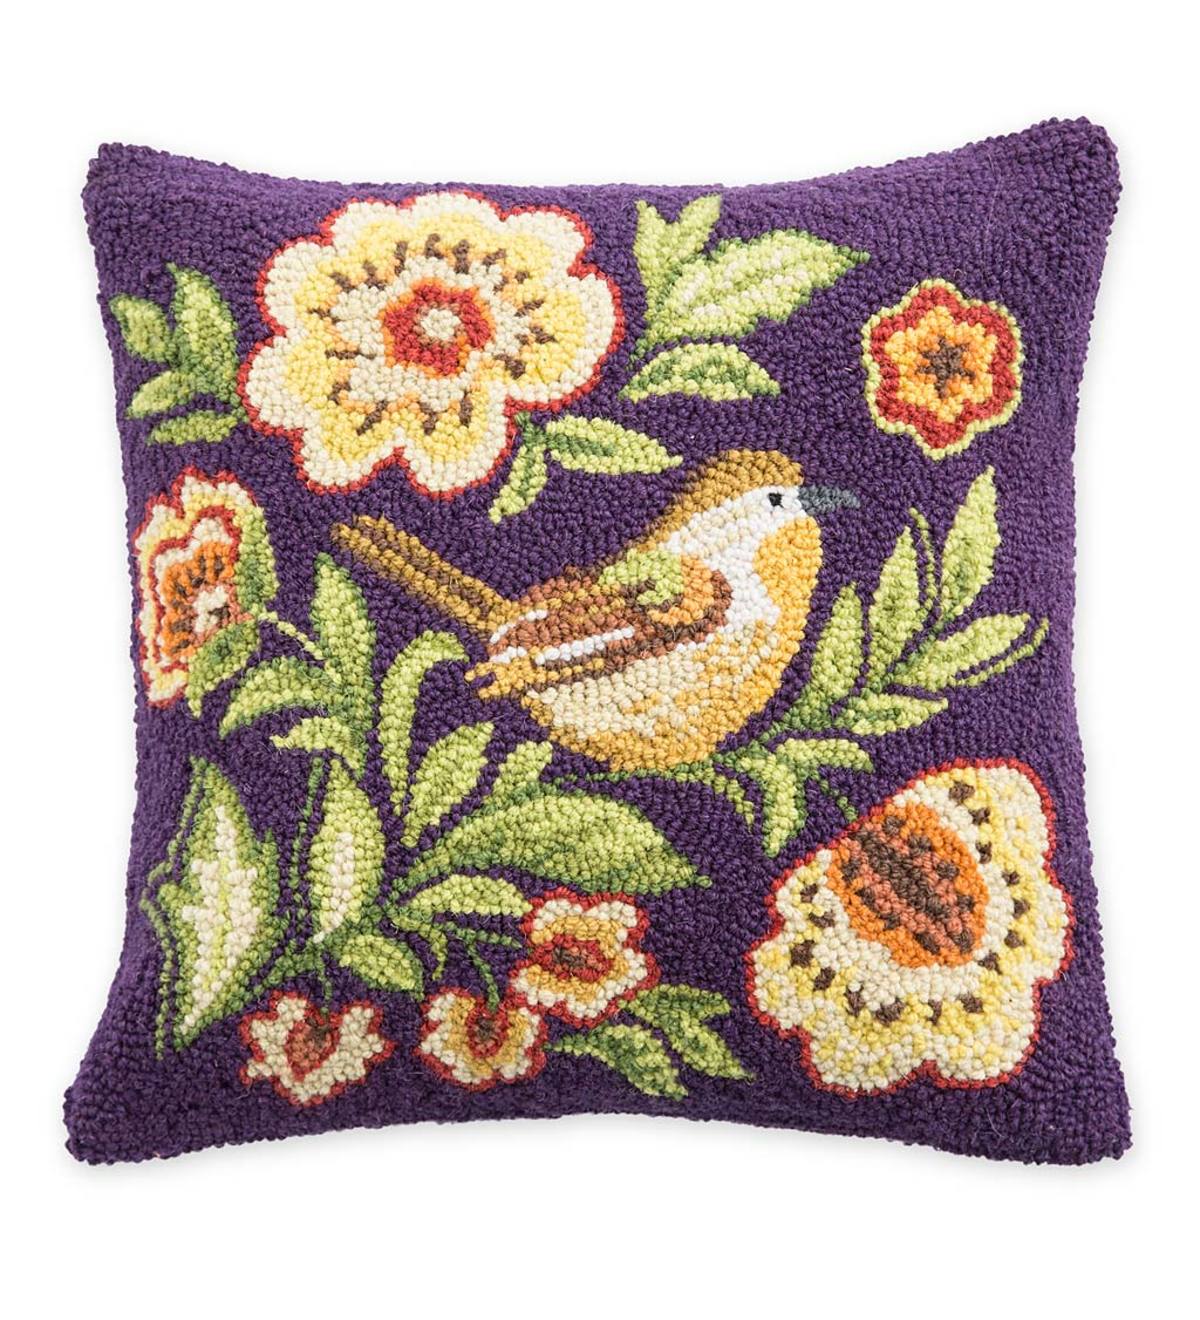 Hand-Hooked Wool Delilah Bird and Floral Throw Pillow